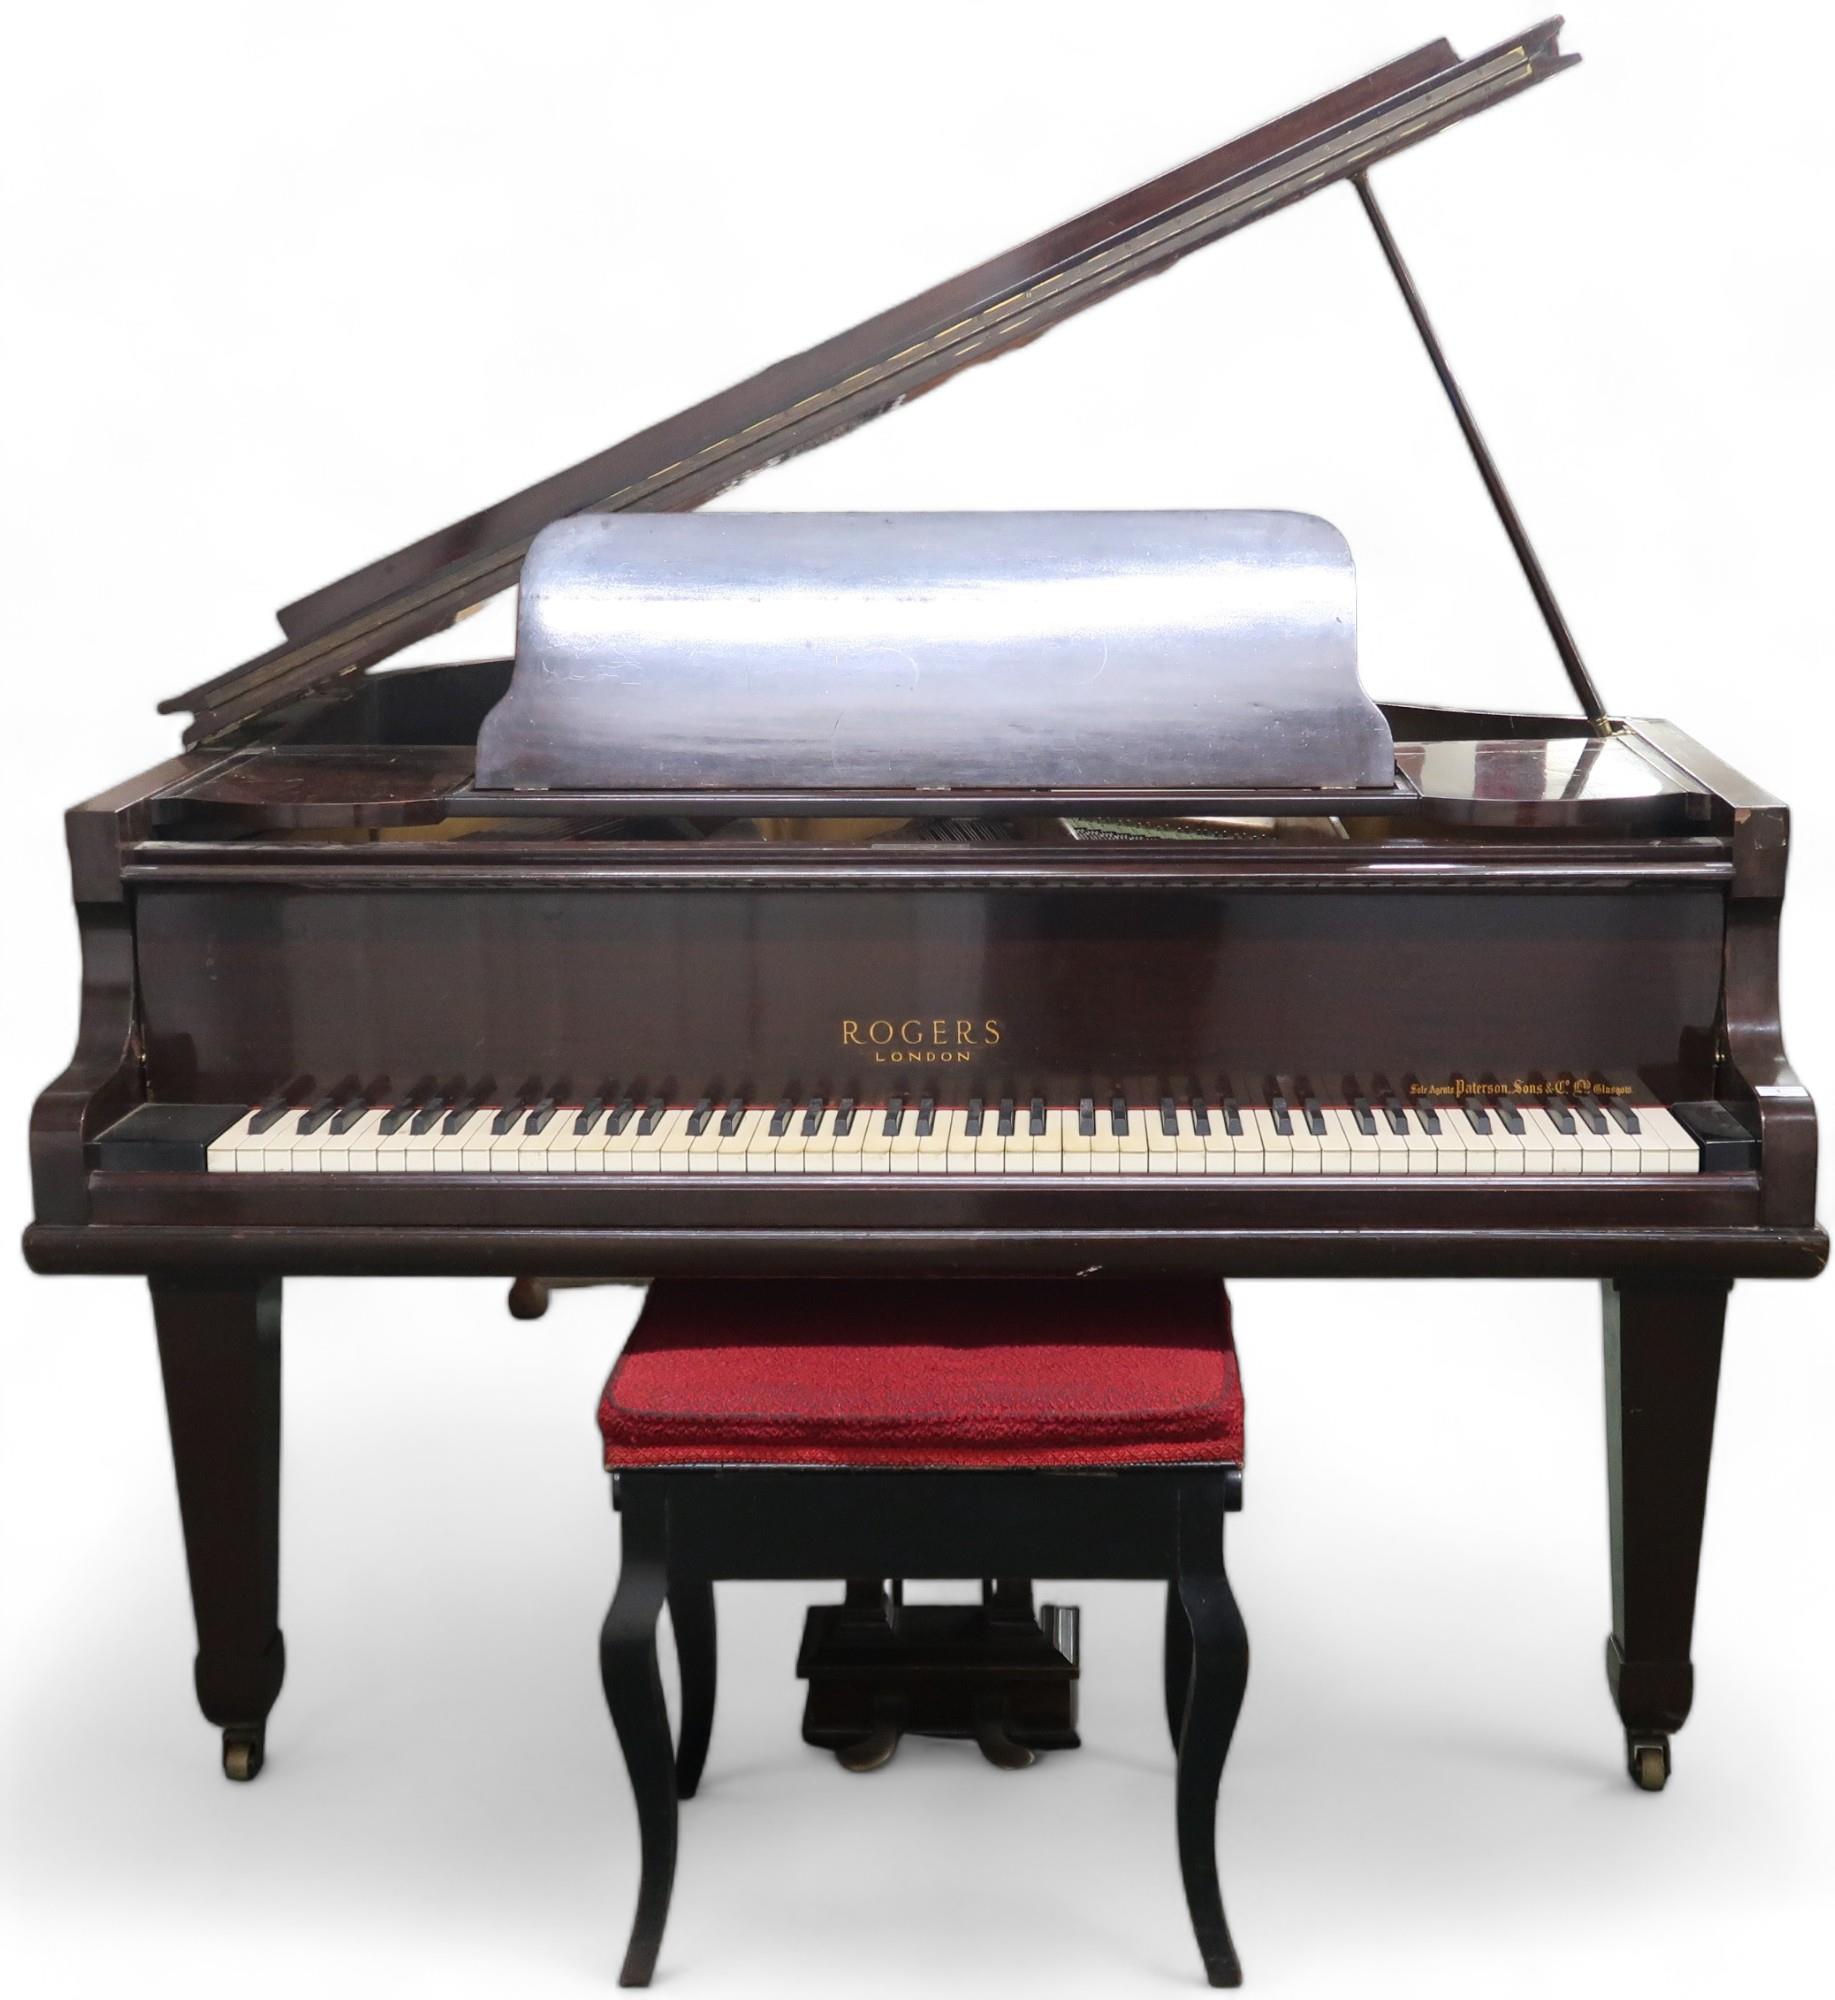 A Victorian mahogany case George Rogers & Sons, London baby grand piano, serial number 48855 and